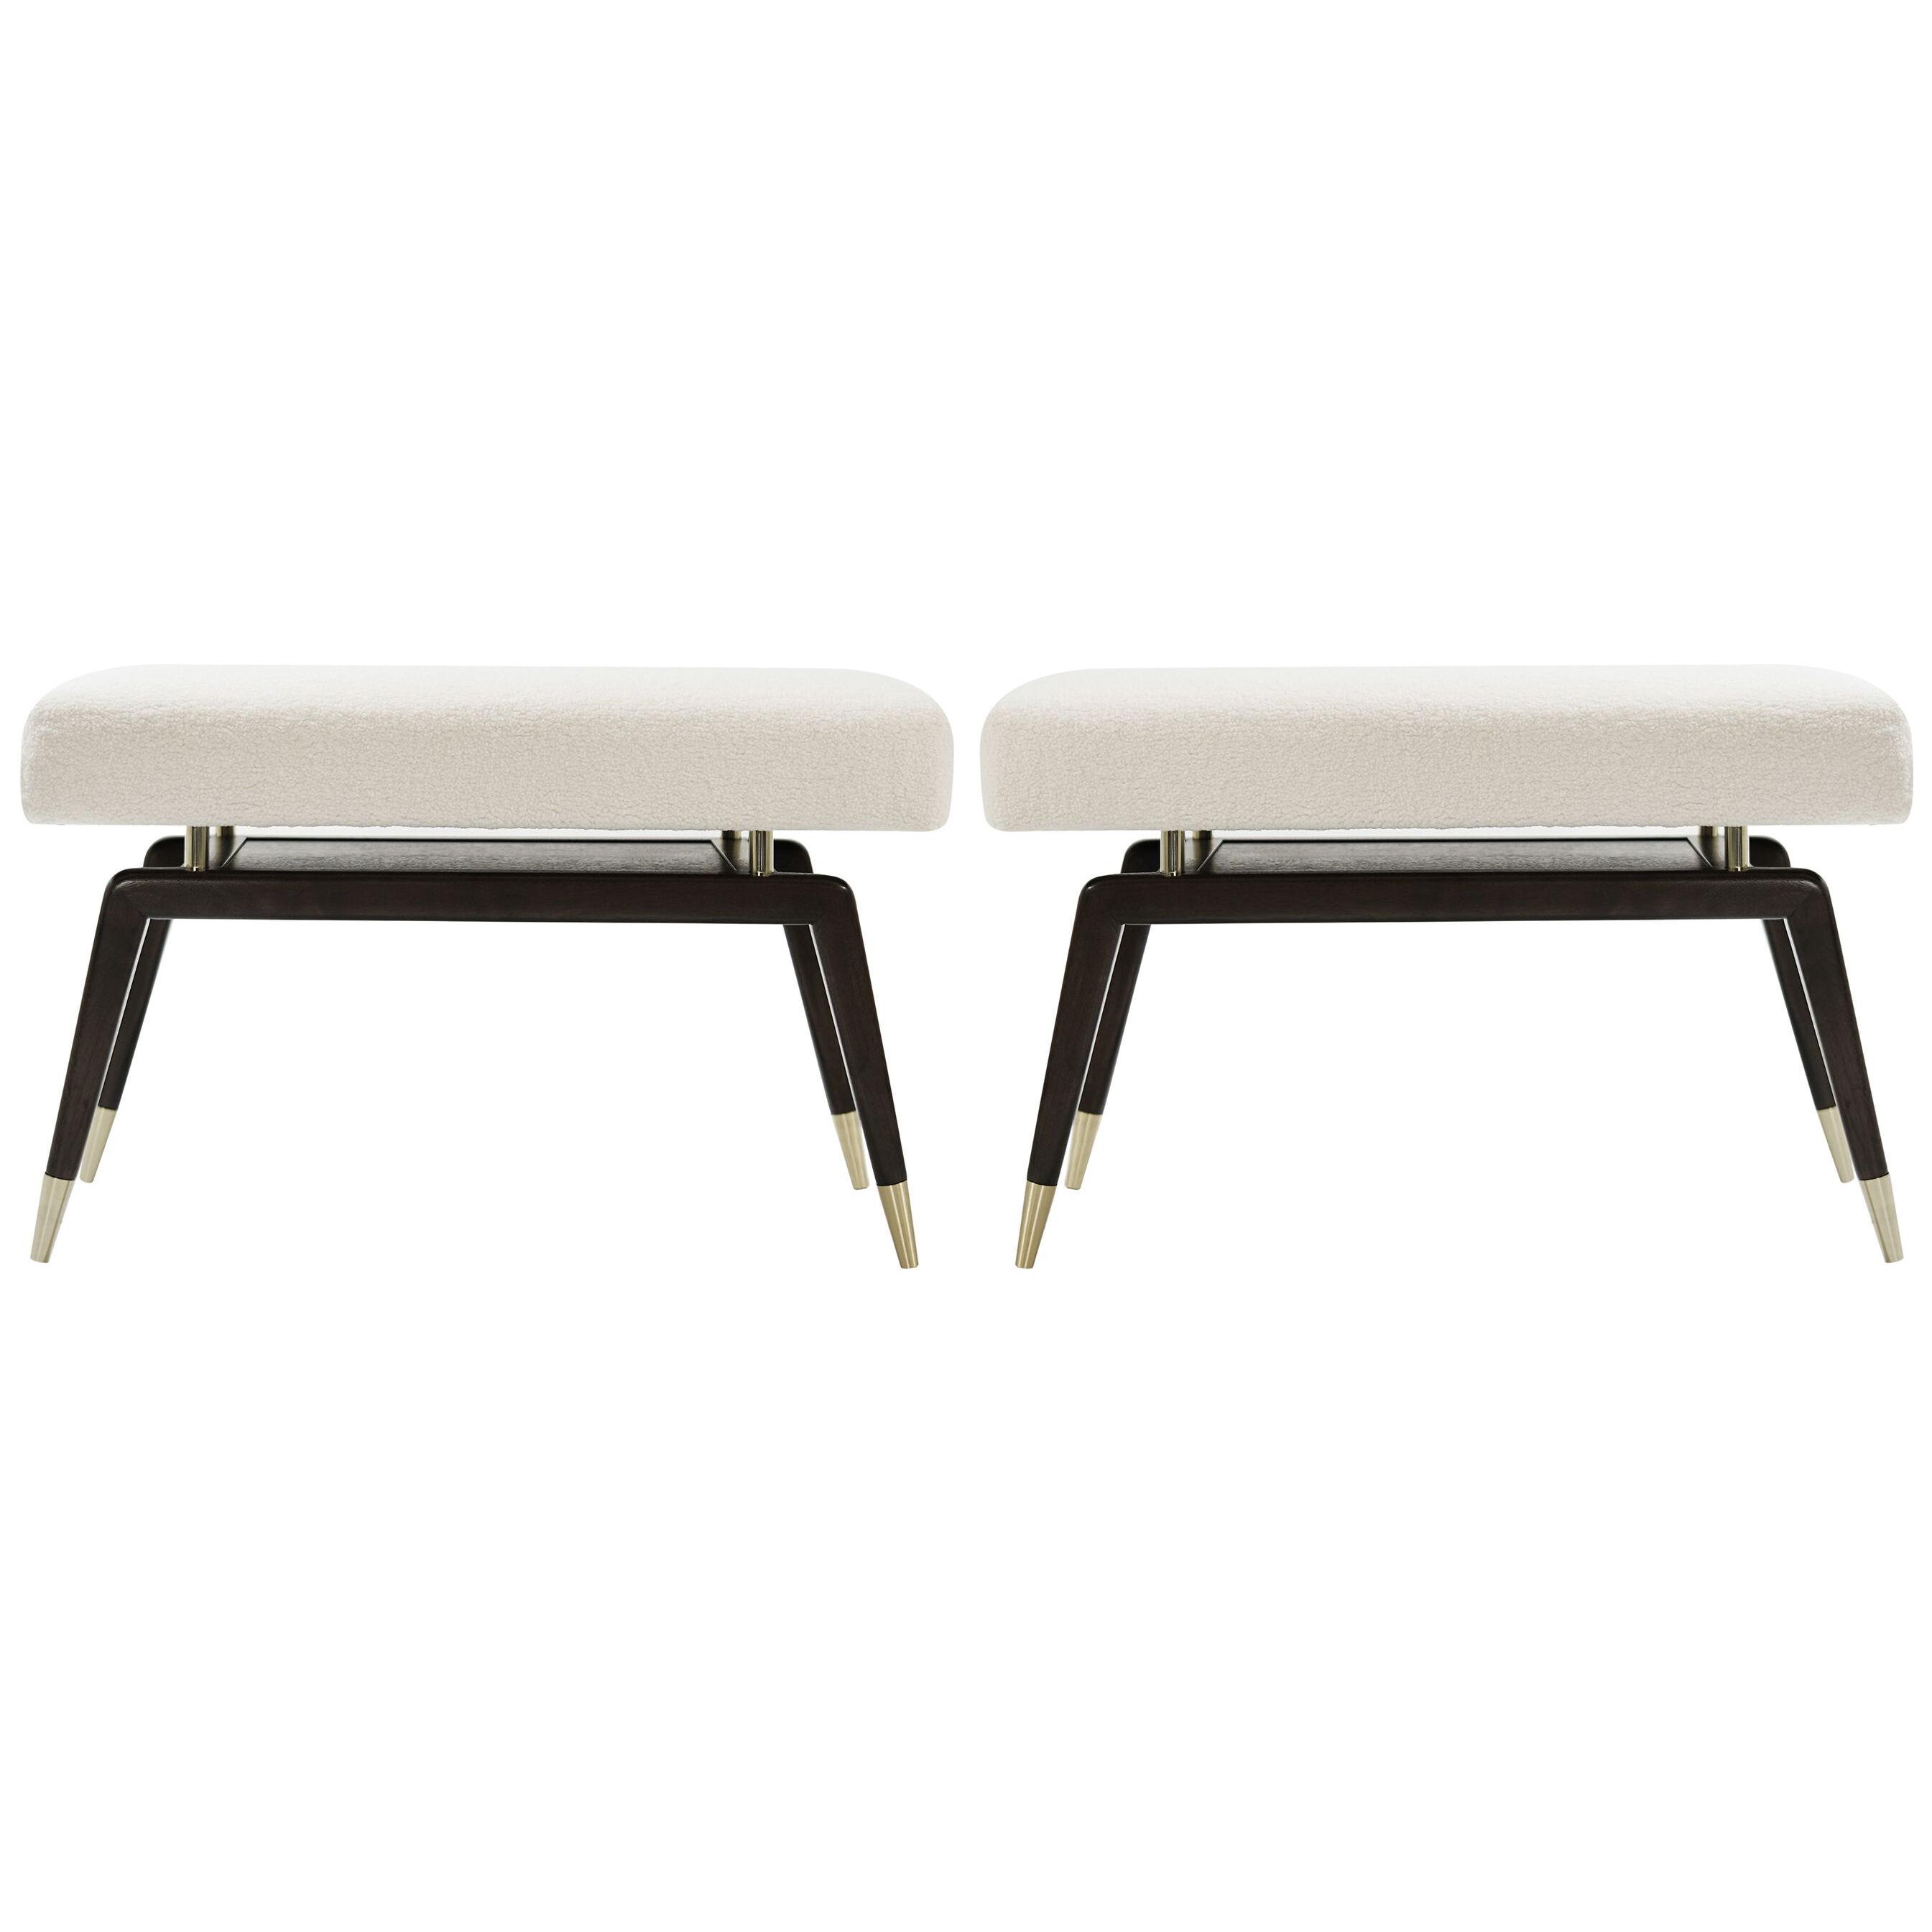 Set of "Gio" Stools by Stamford Modern